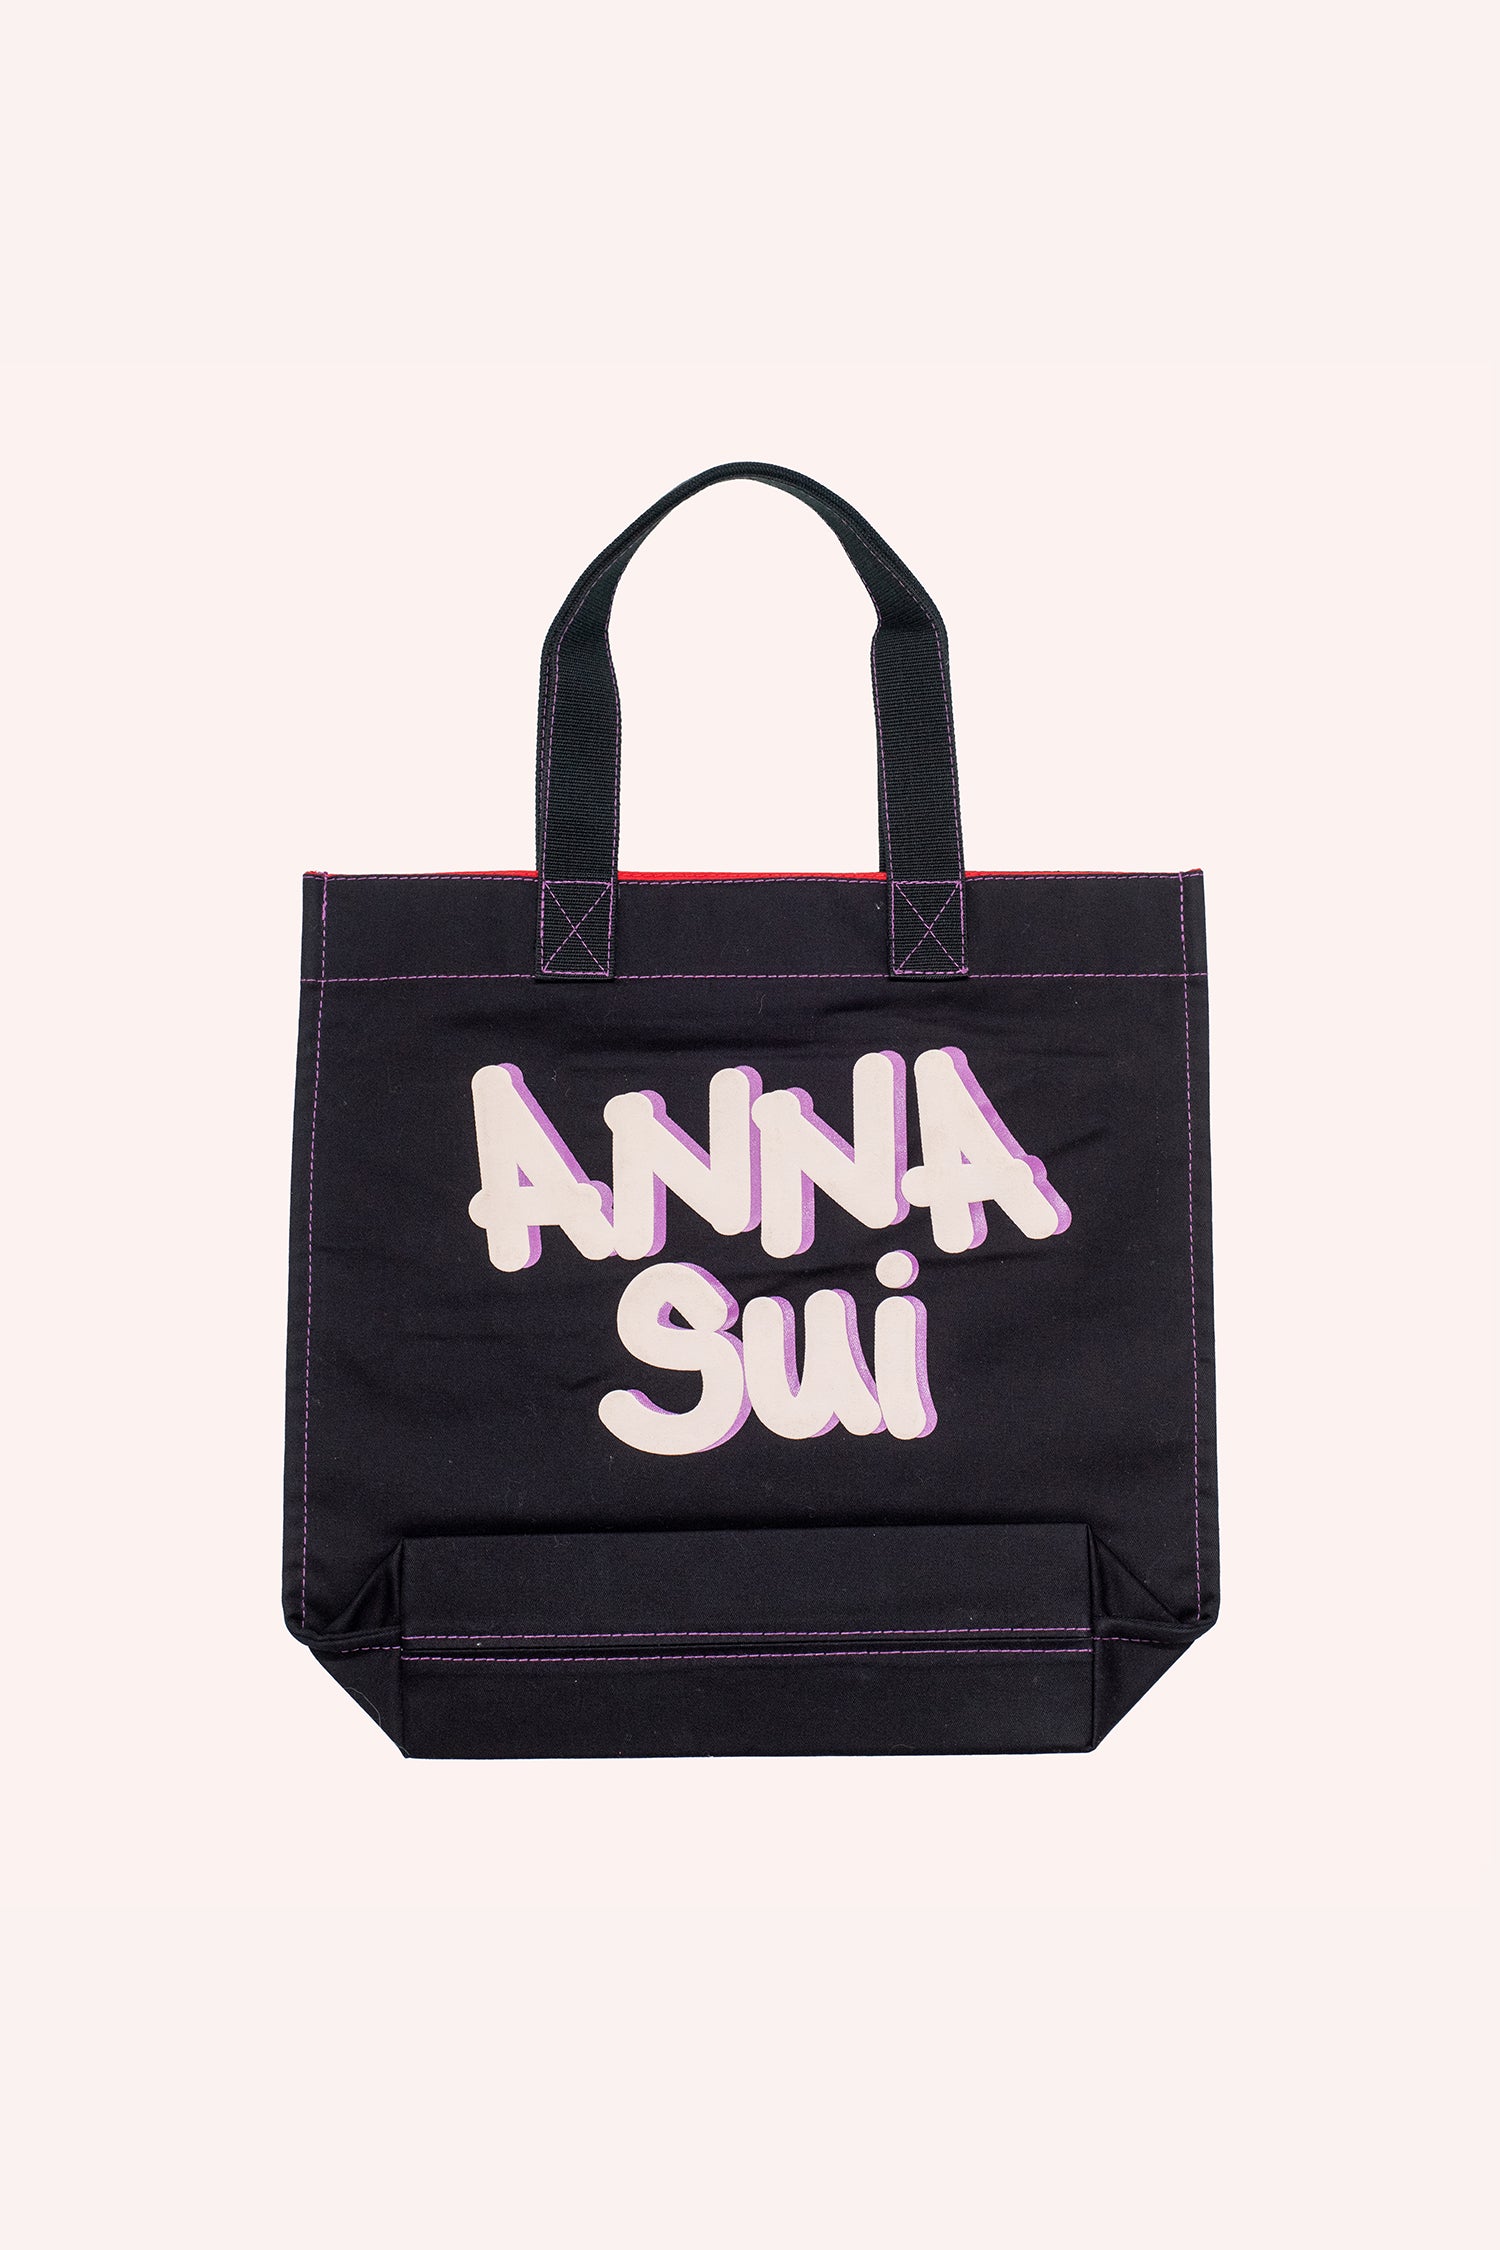 bags – Anna Sui